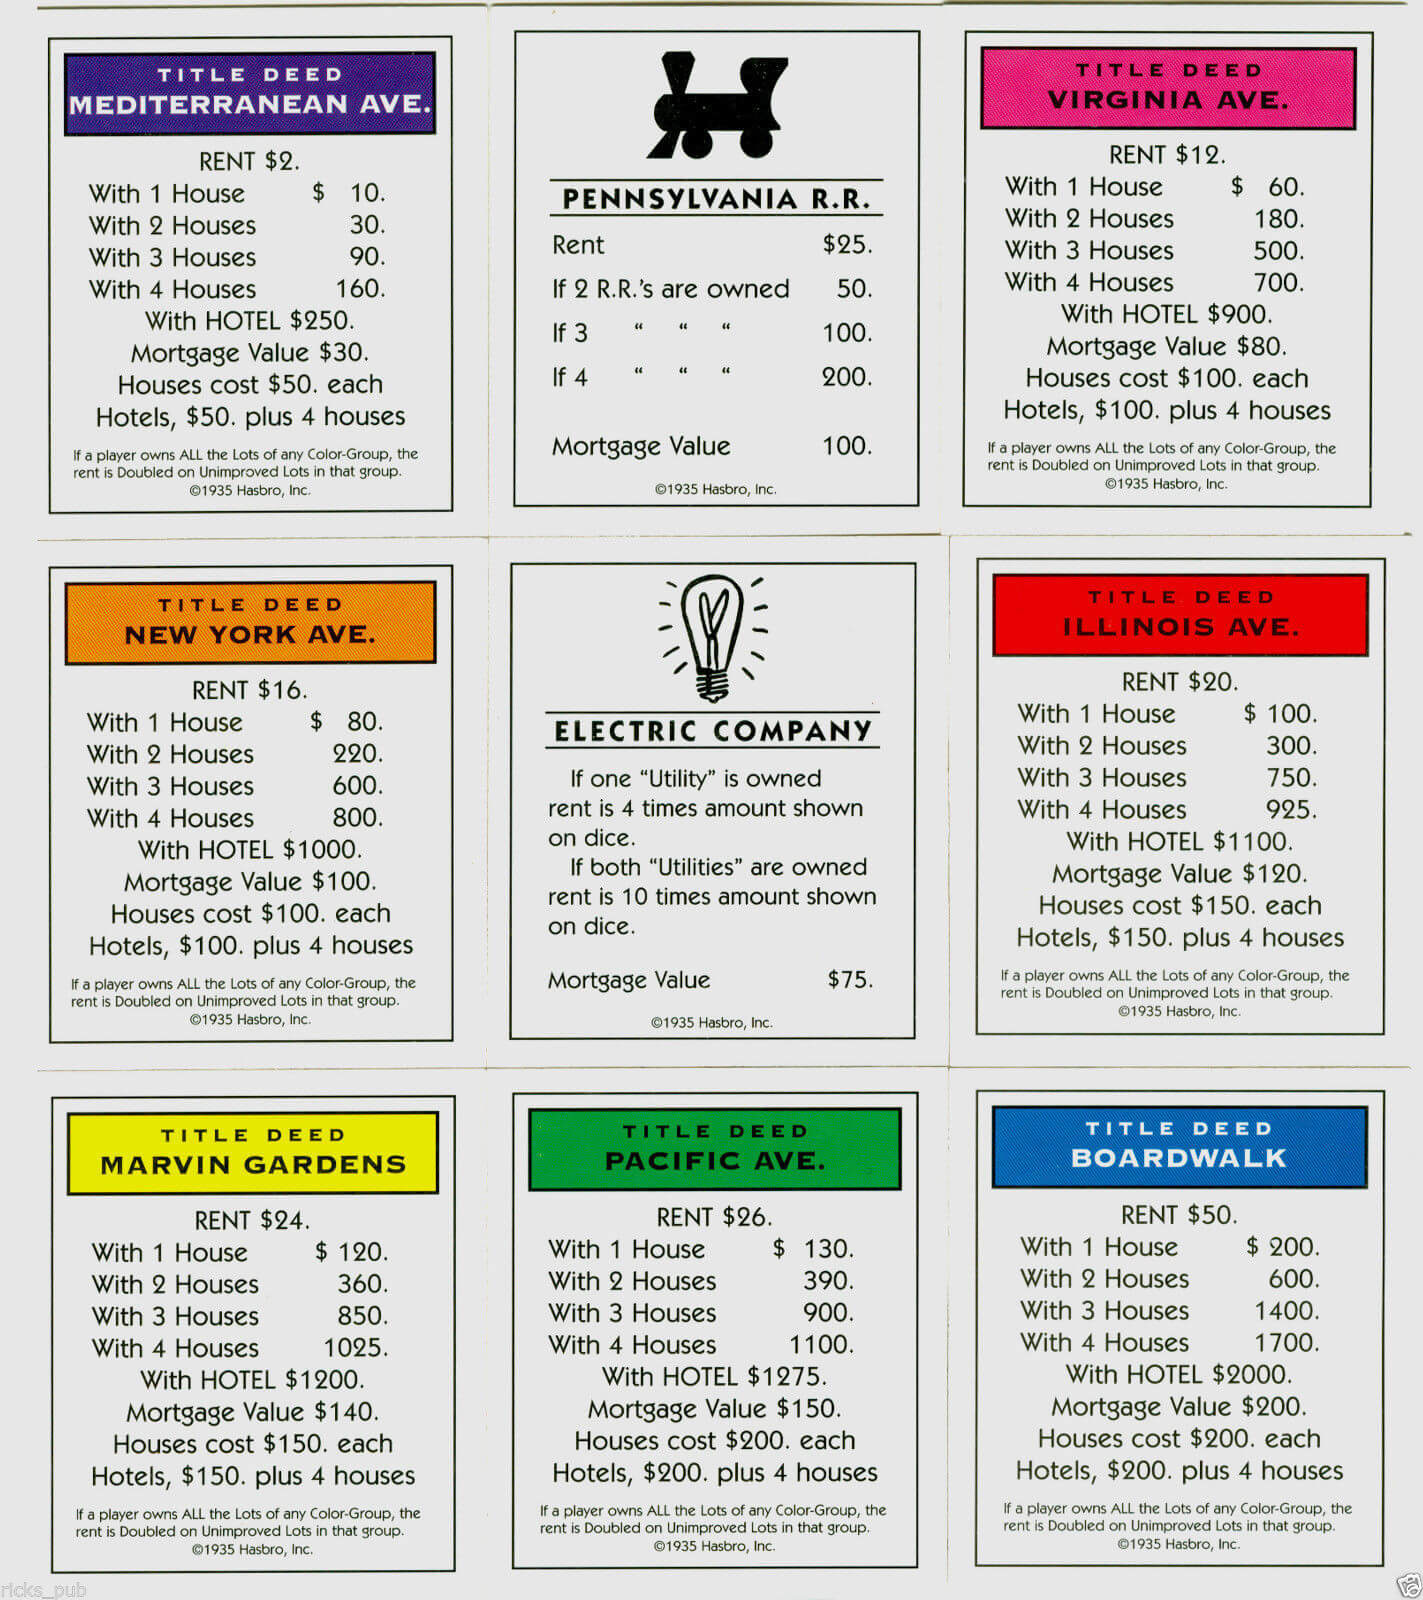 1C1 Monopoly Chance Card Template | Wiring Library Intended For Chance Card Template